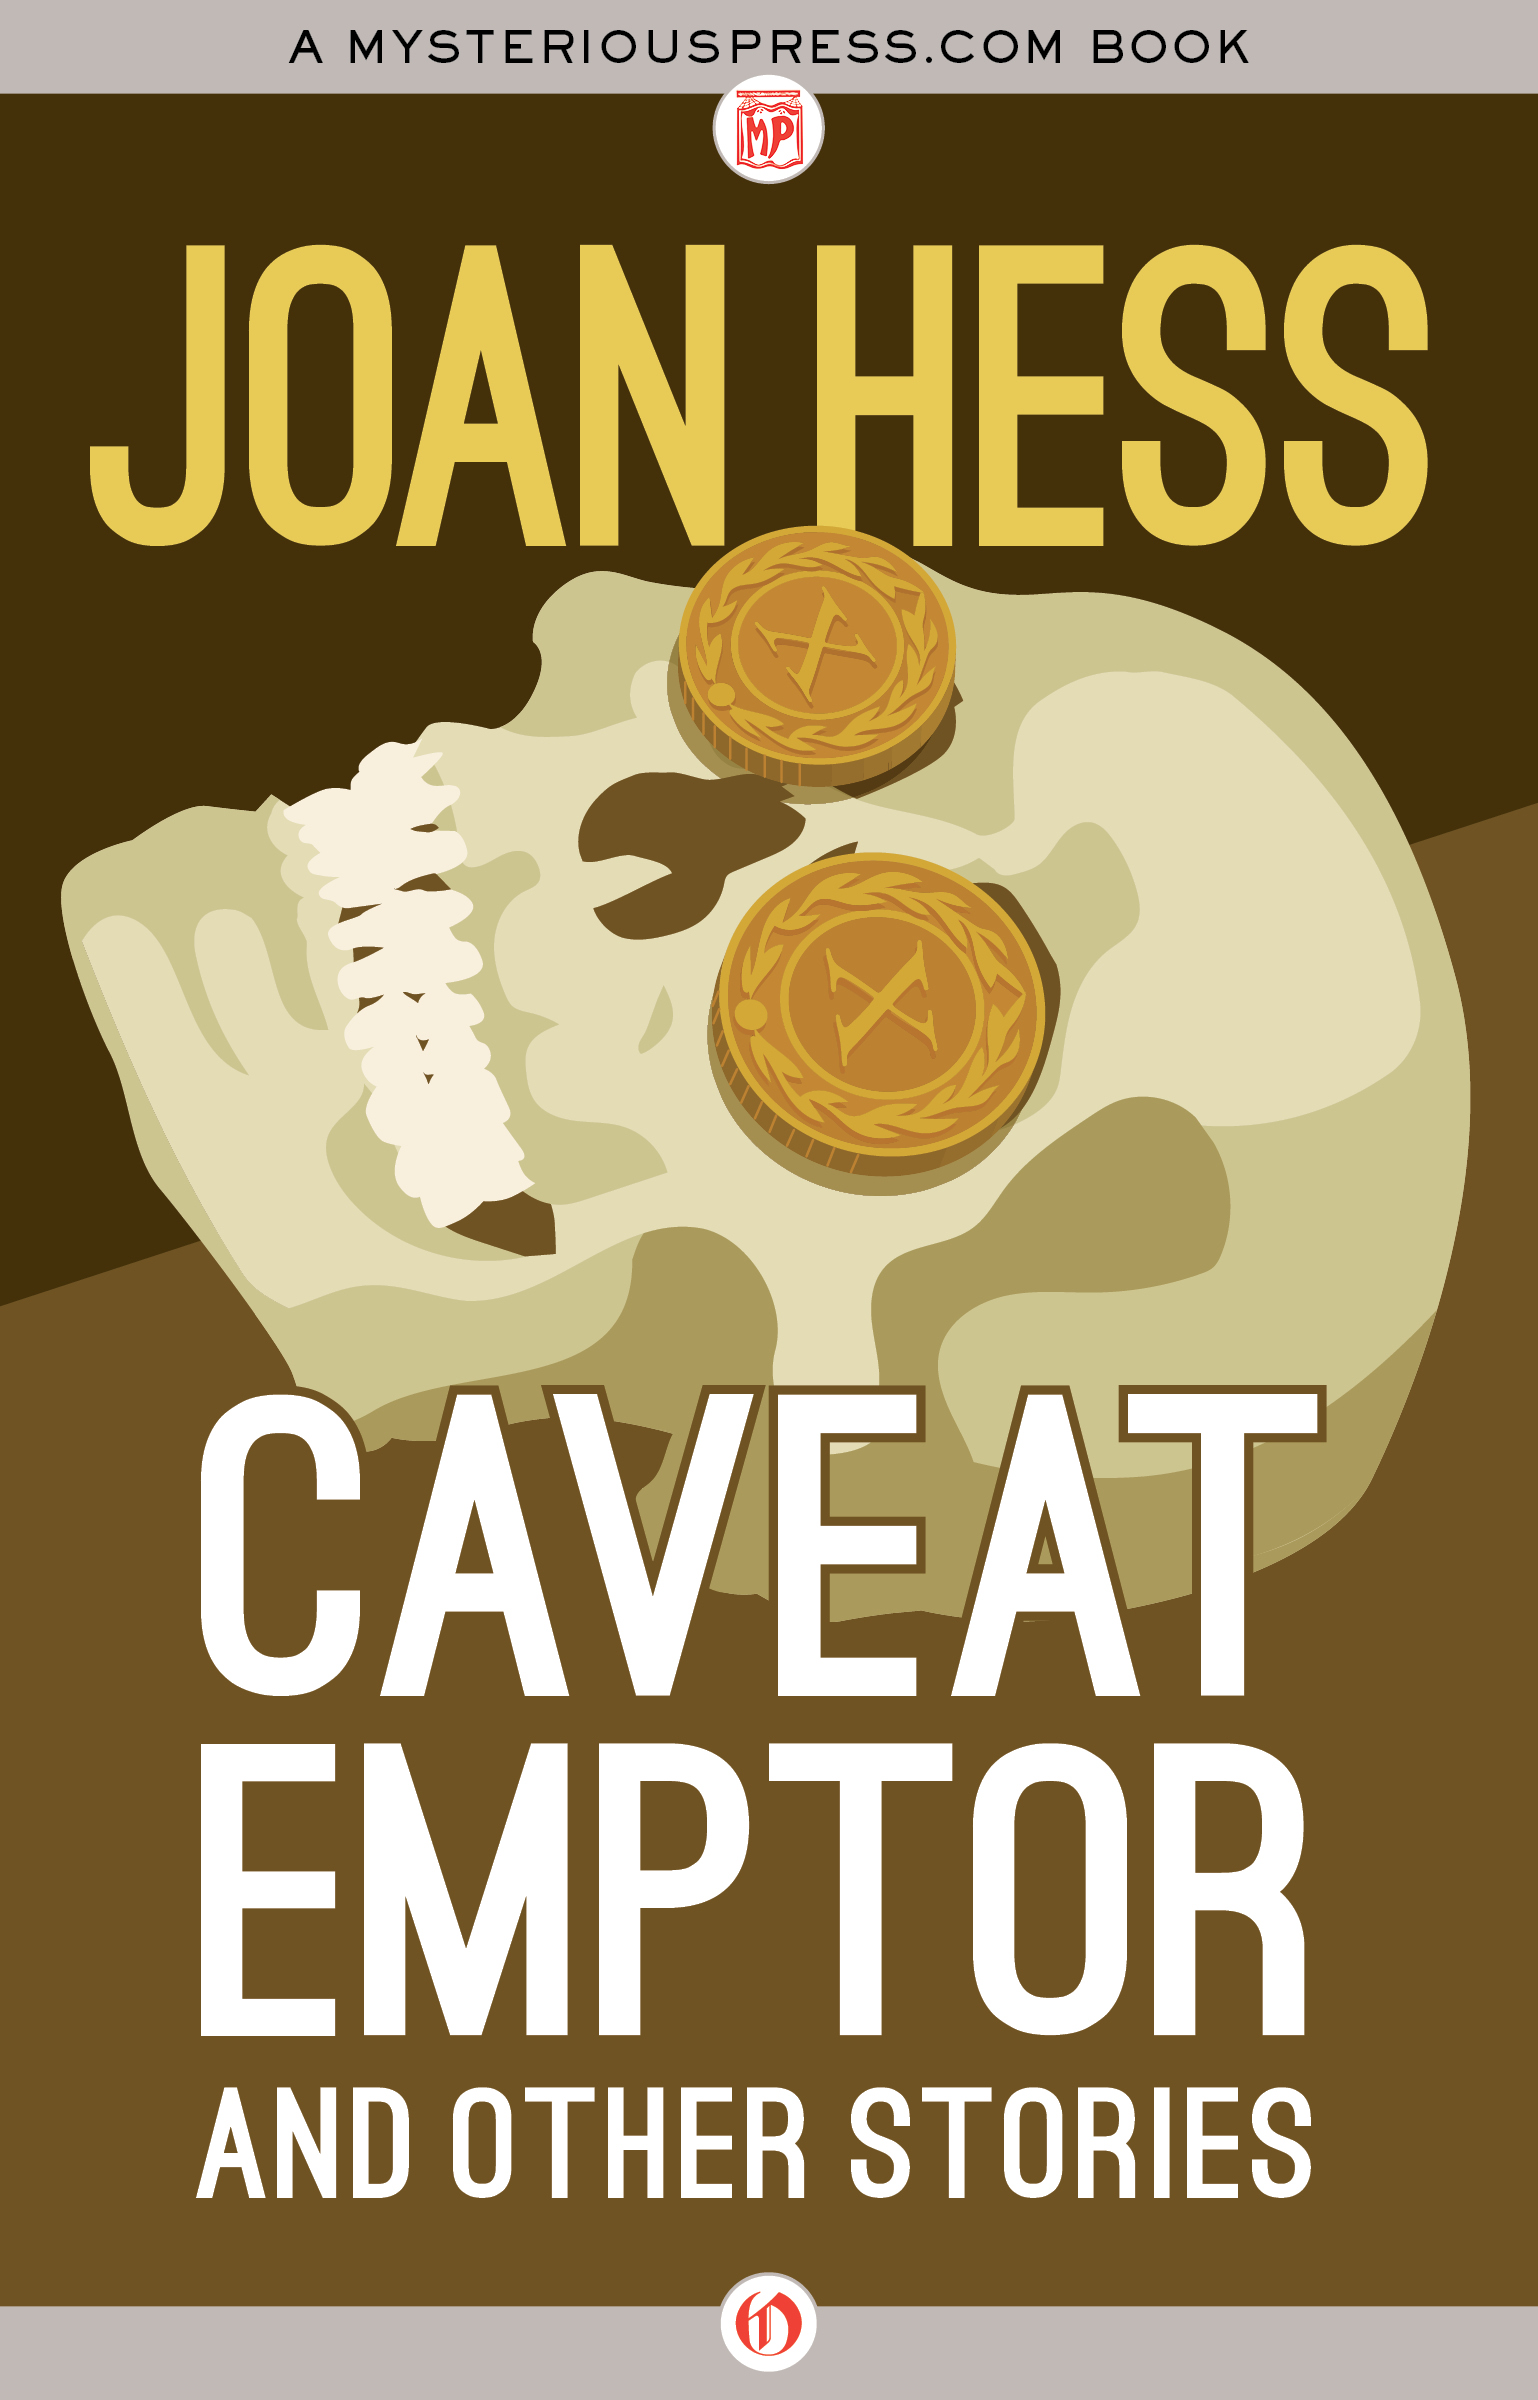 Caveat Emptor and Other Stories (2016) by Joan Hess